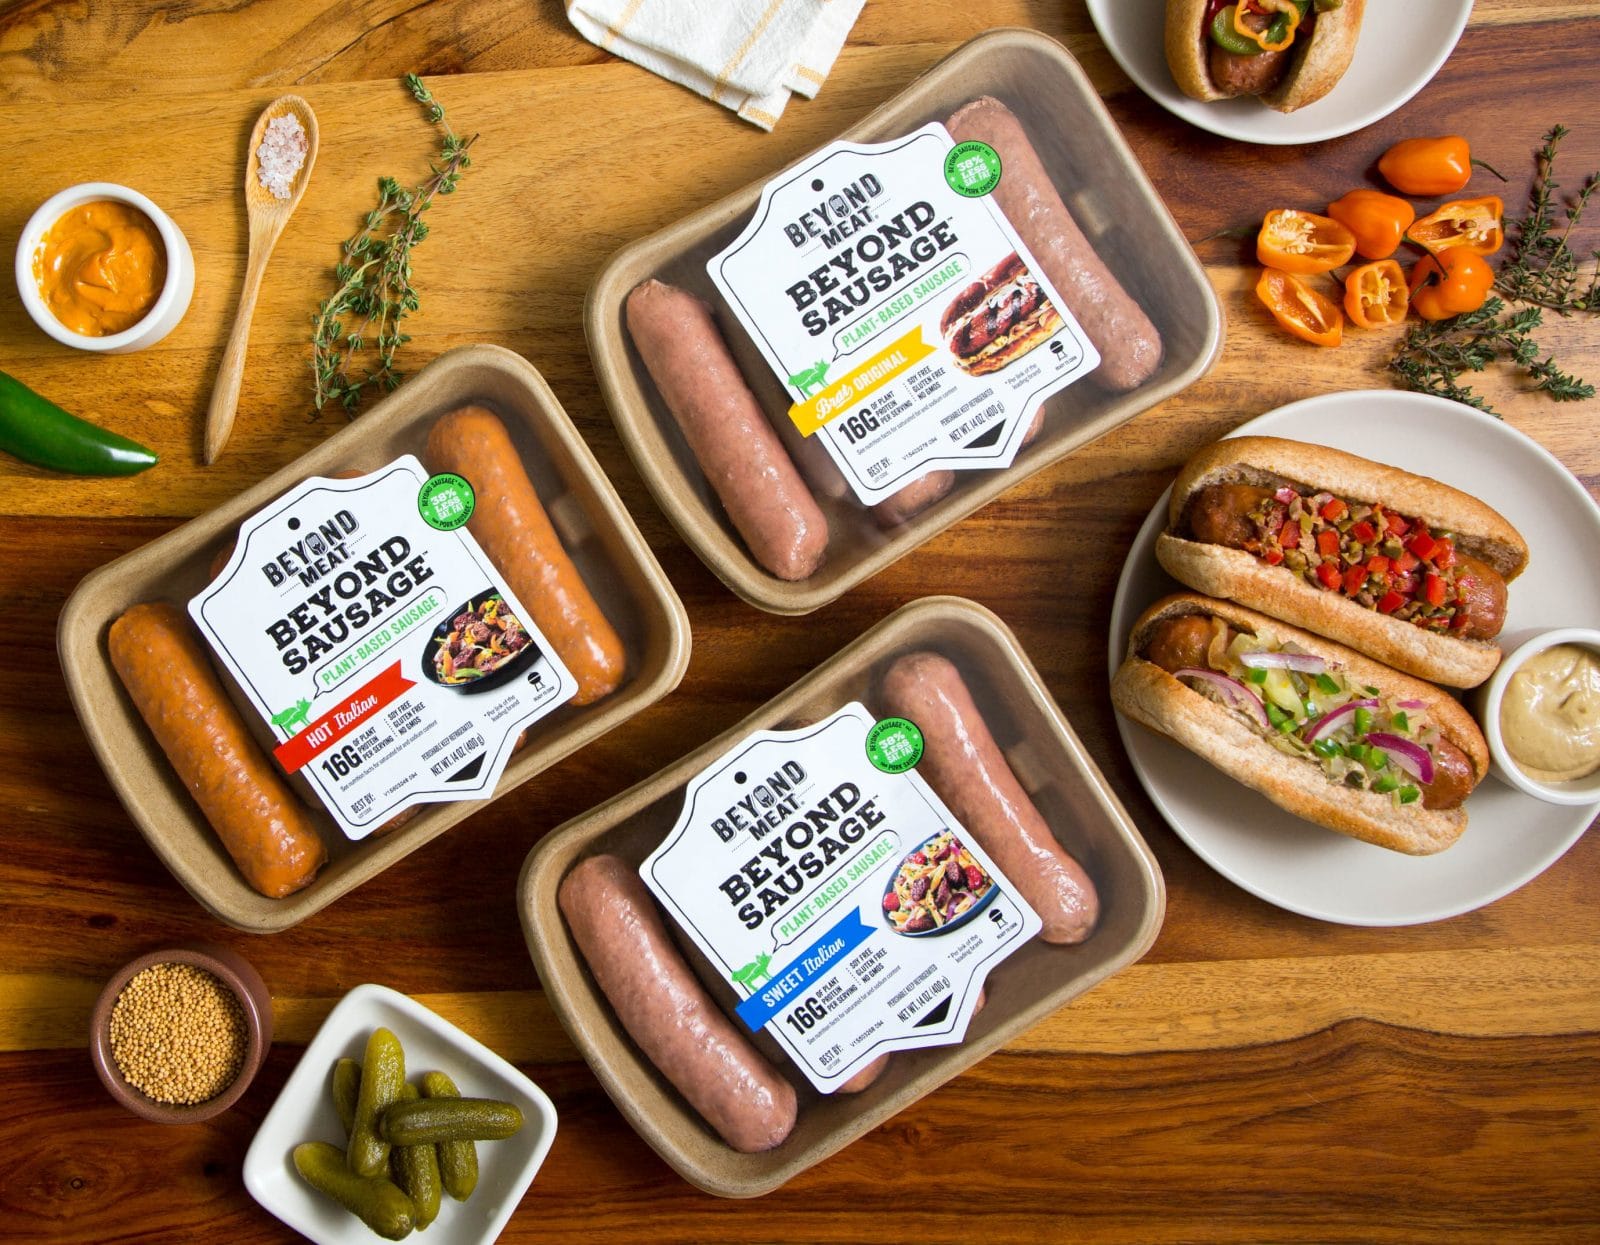 Beyond Meat Opens Second Facility, Hires Hundreds to Keep Up With